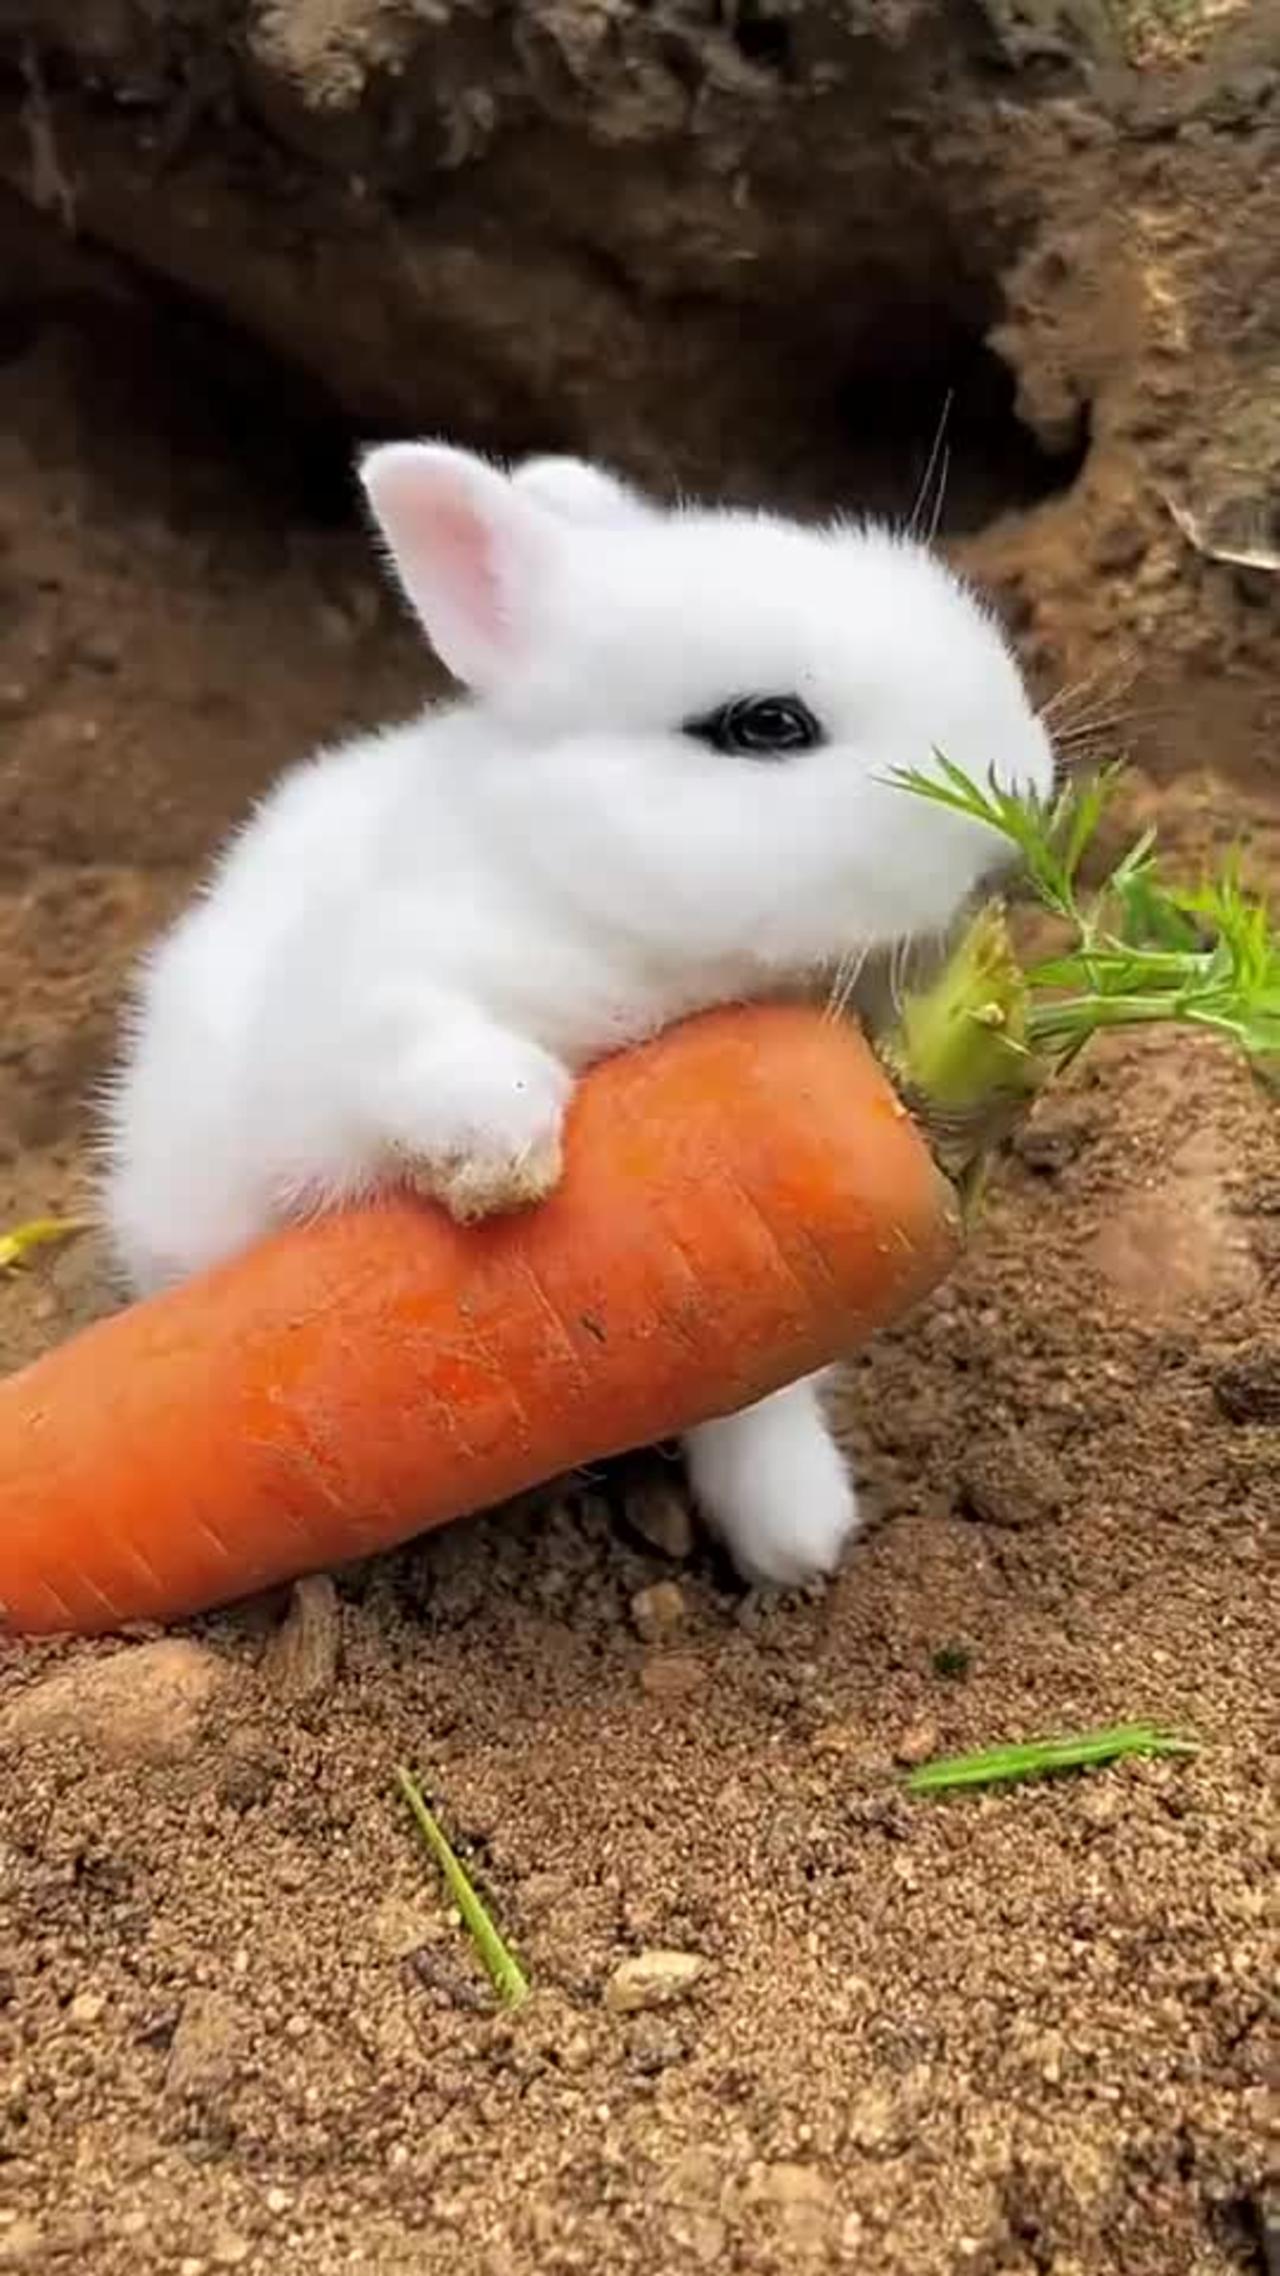 What a lovely rabbit